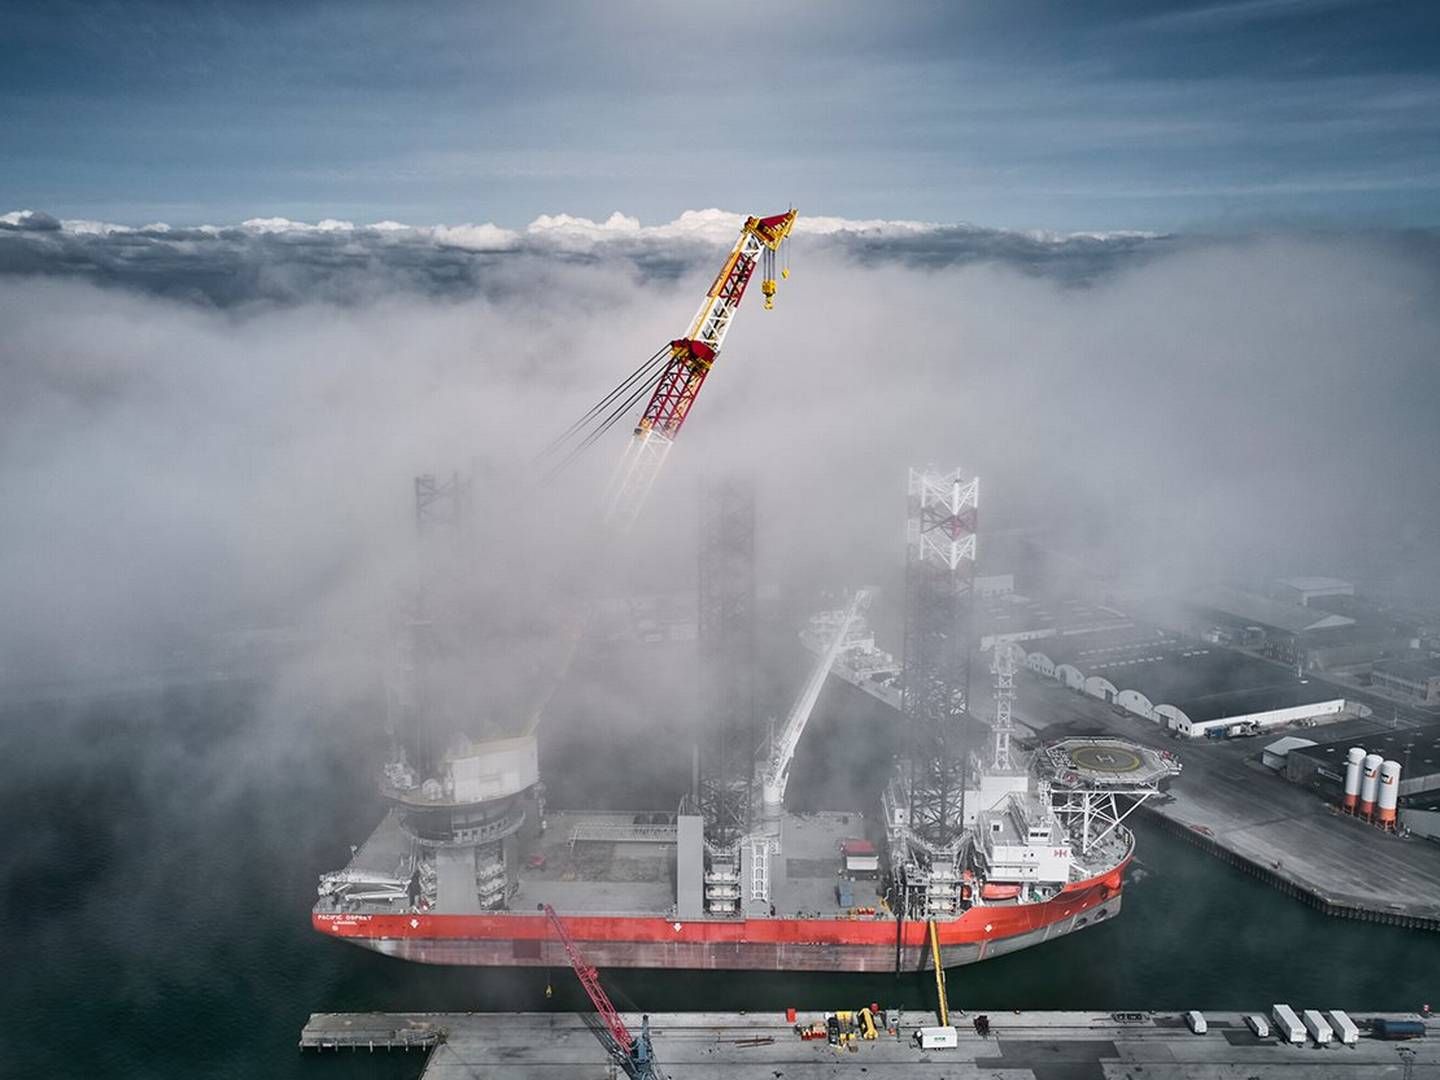 Cadeler currently has two large vessels that can install wind turbines offshore with the aid of large cranes on deck. The liner has more expensive ships on the way whereof one is ordered for a collaborative project with Ørsted. | Photo: Cadeler